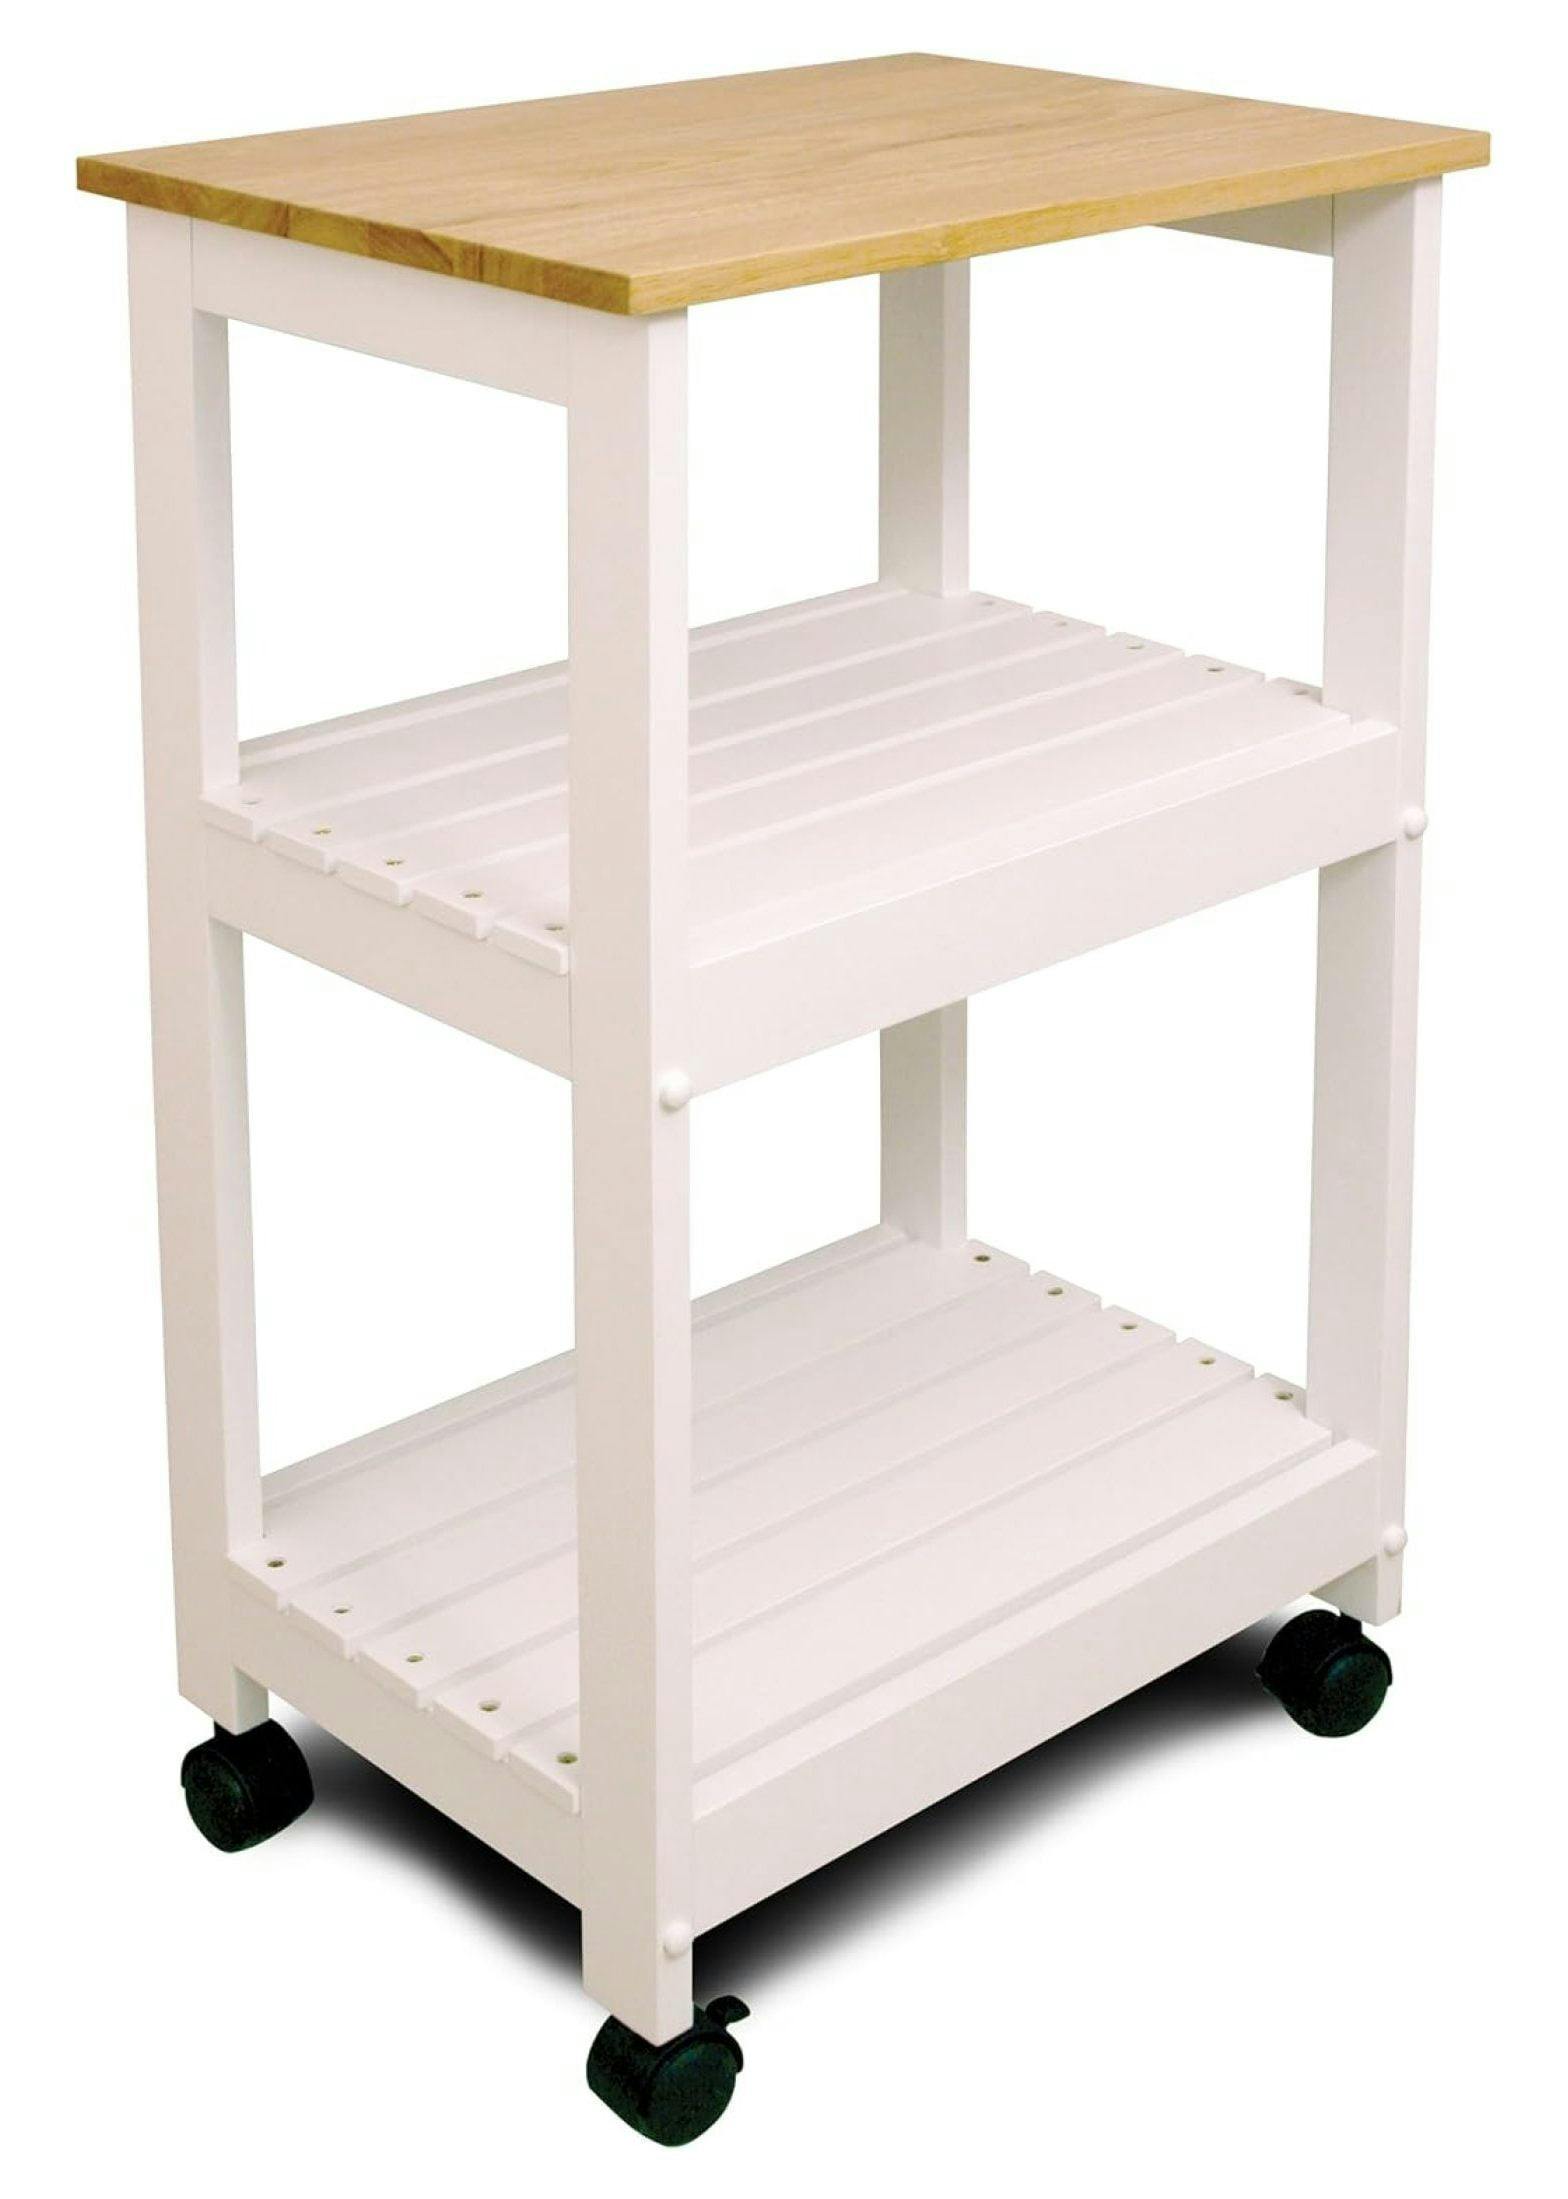 Traditional White and Natural Rubberwood Kitchen Cart with Storage